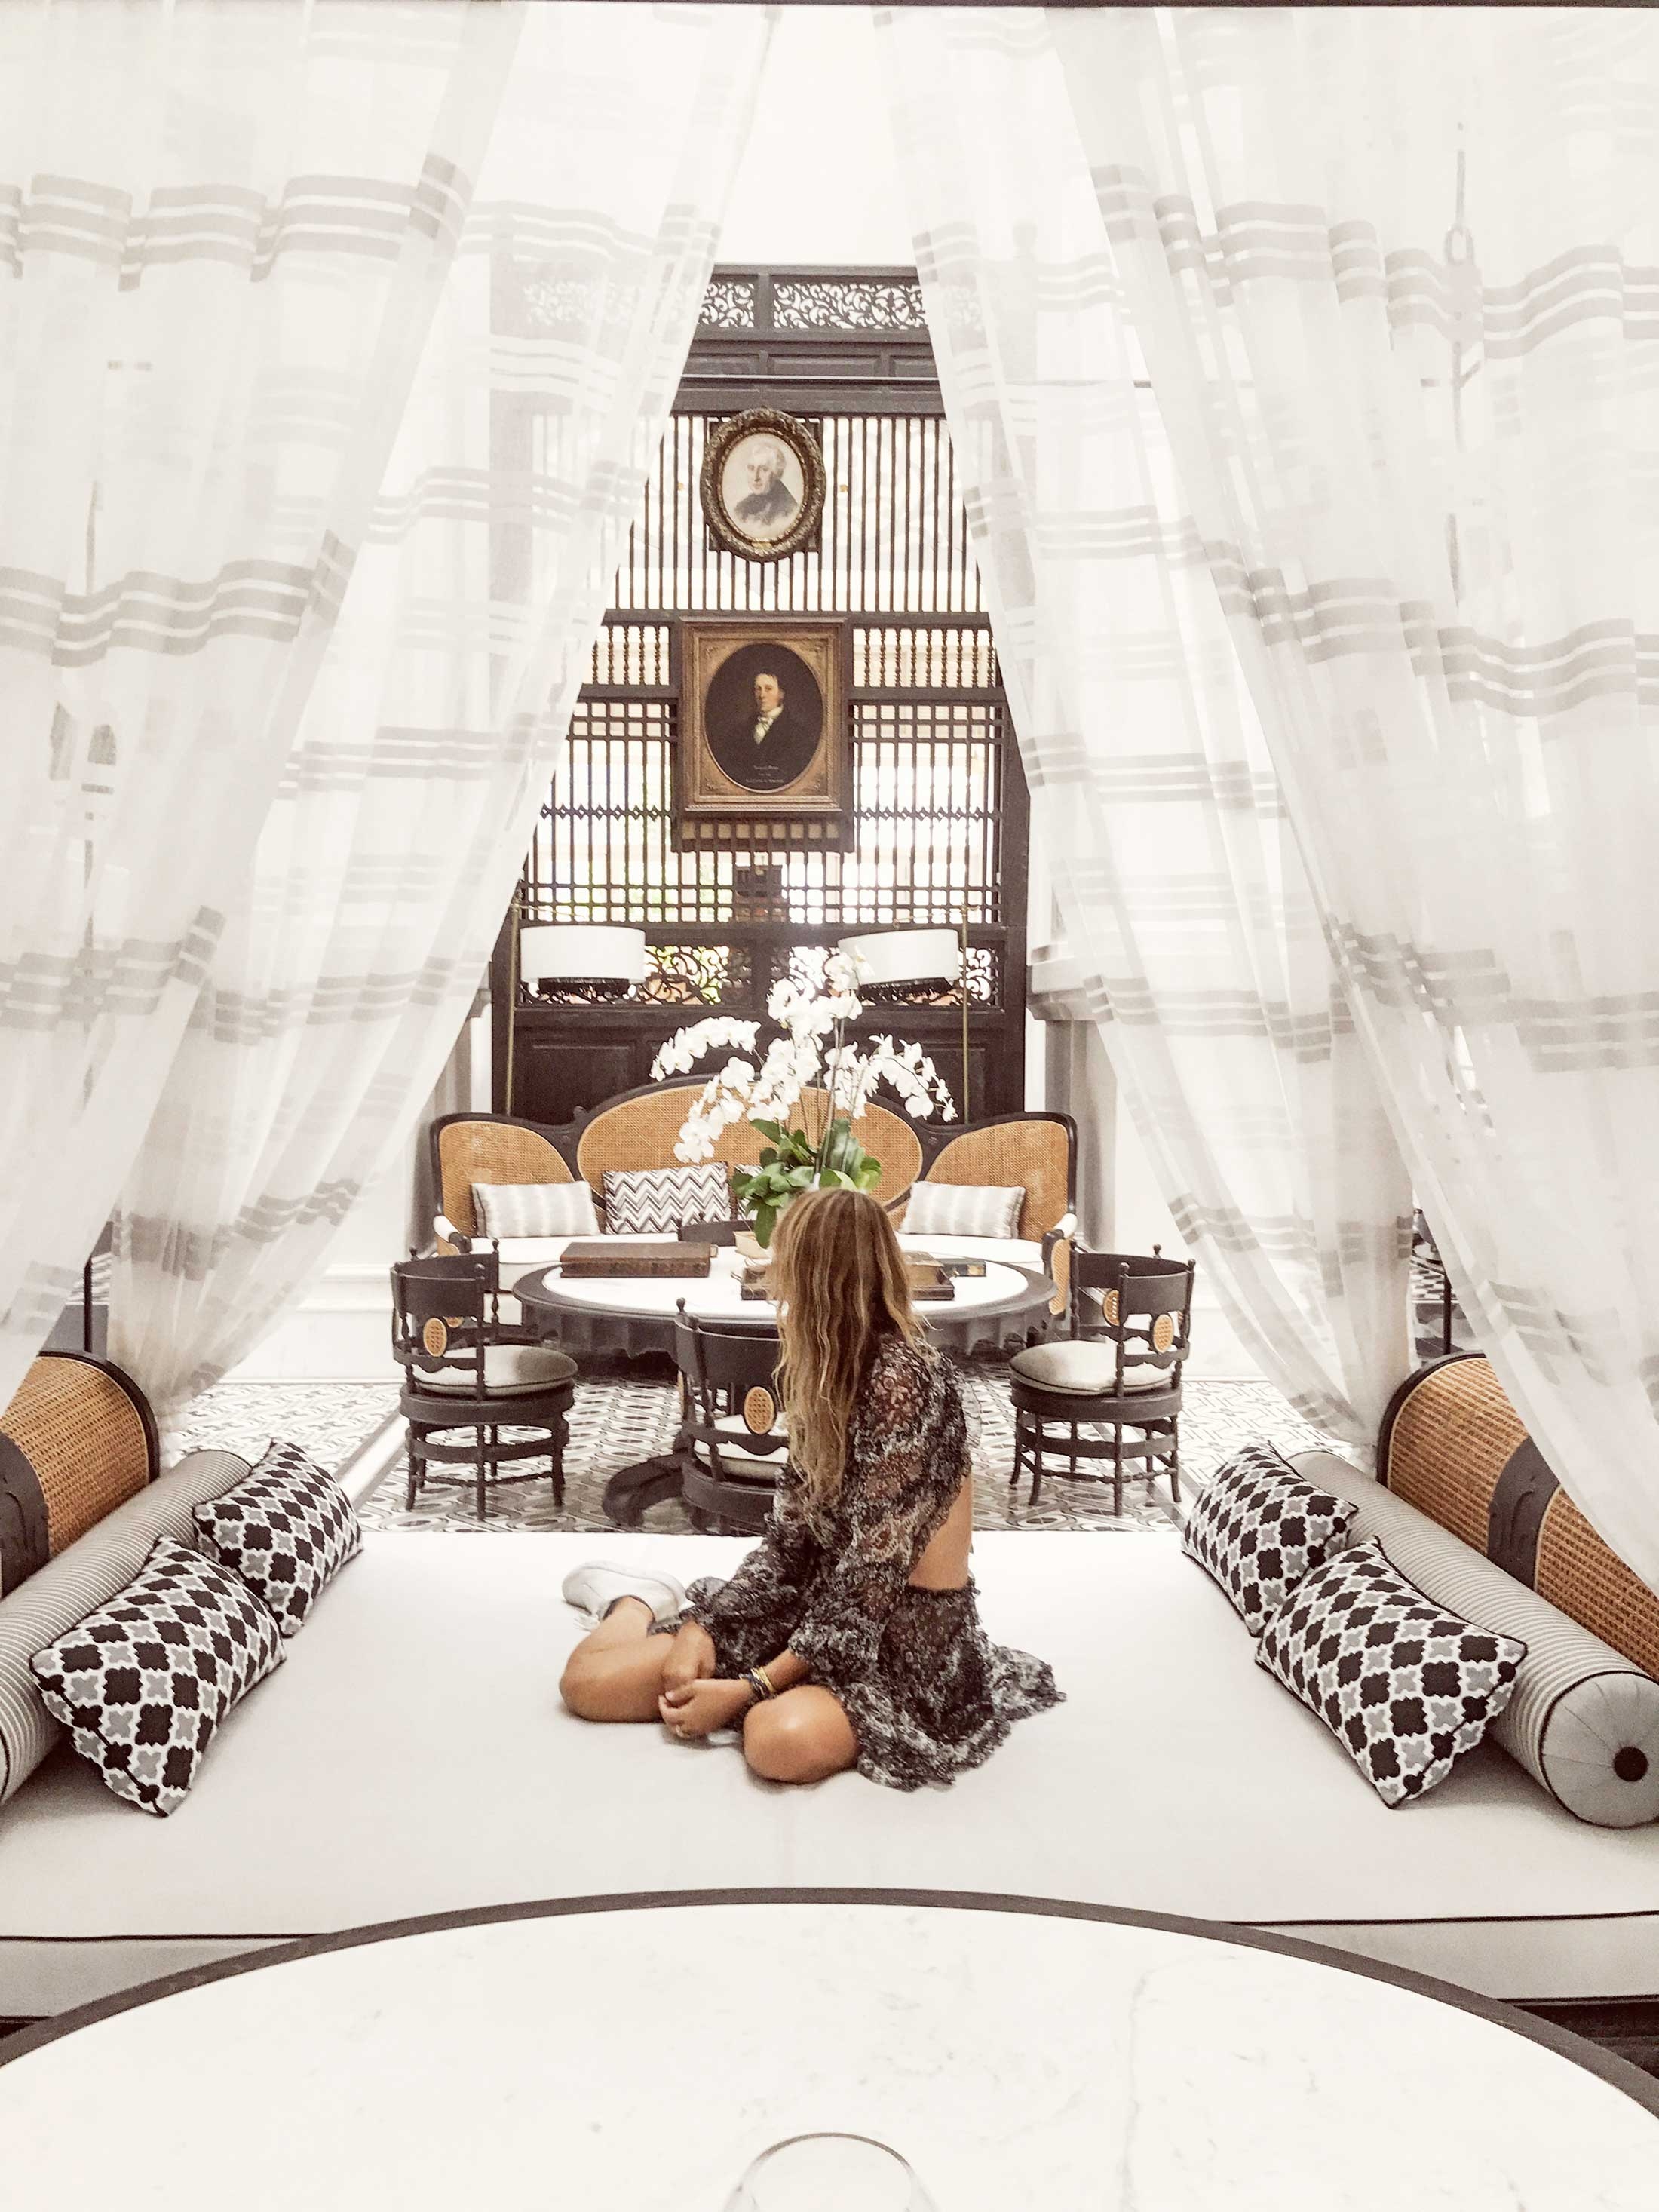 Romy sitting on a large canopy bed with luxurious white curtains and patterned pillows